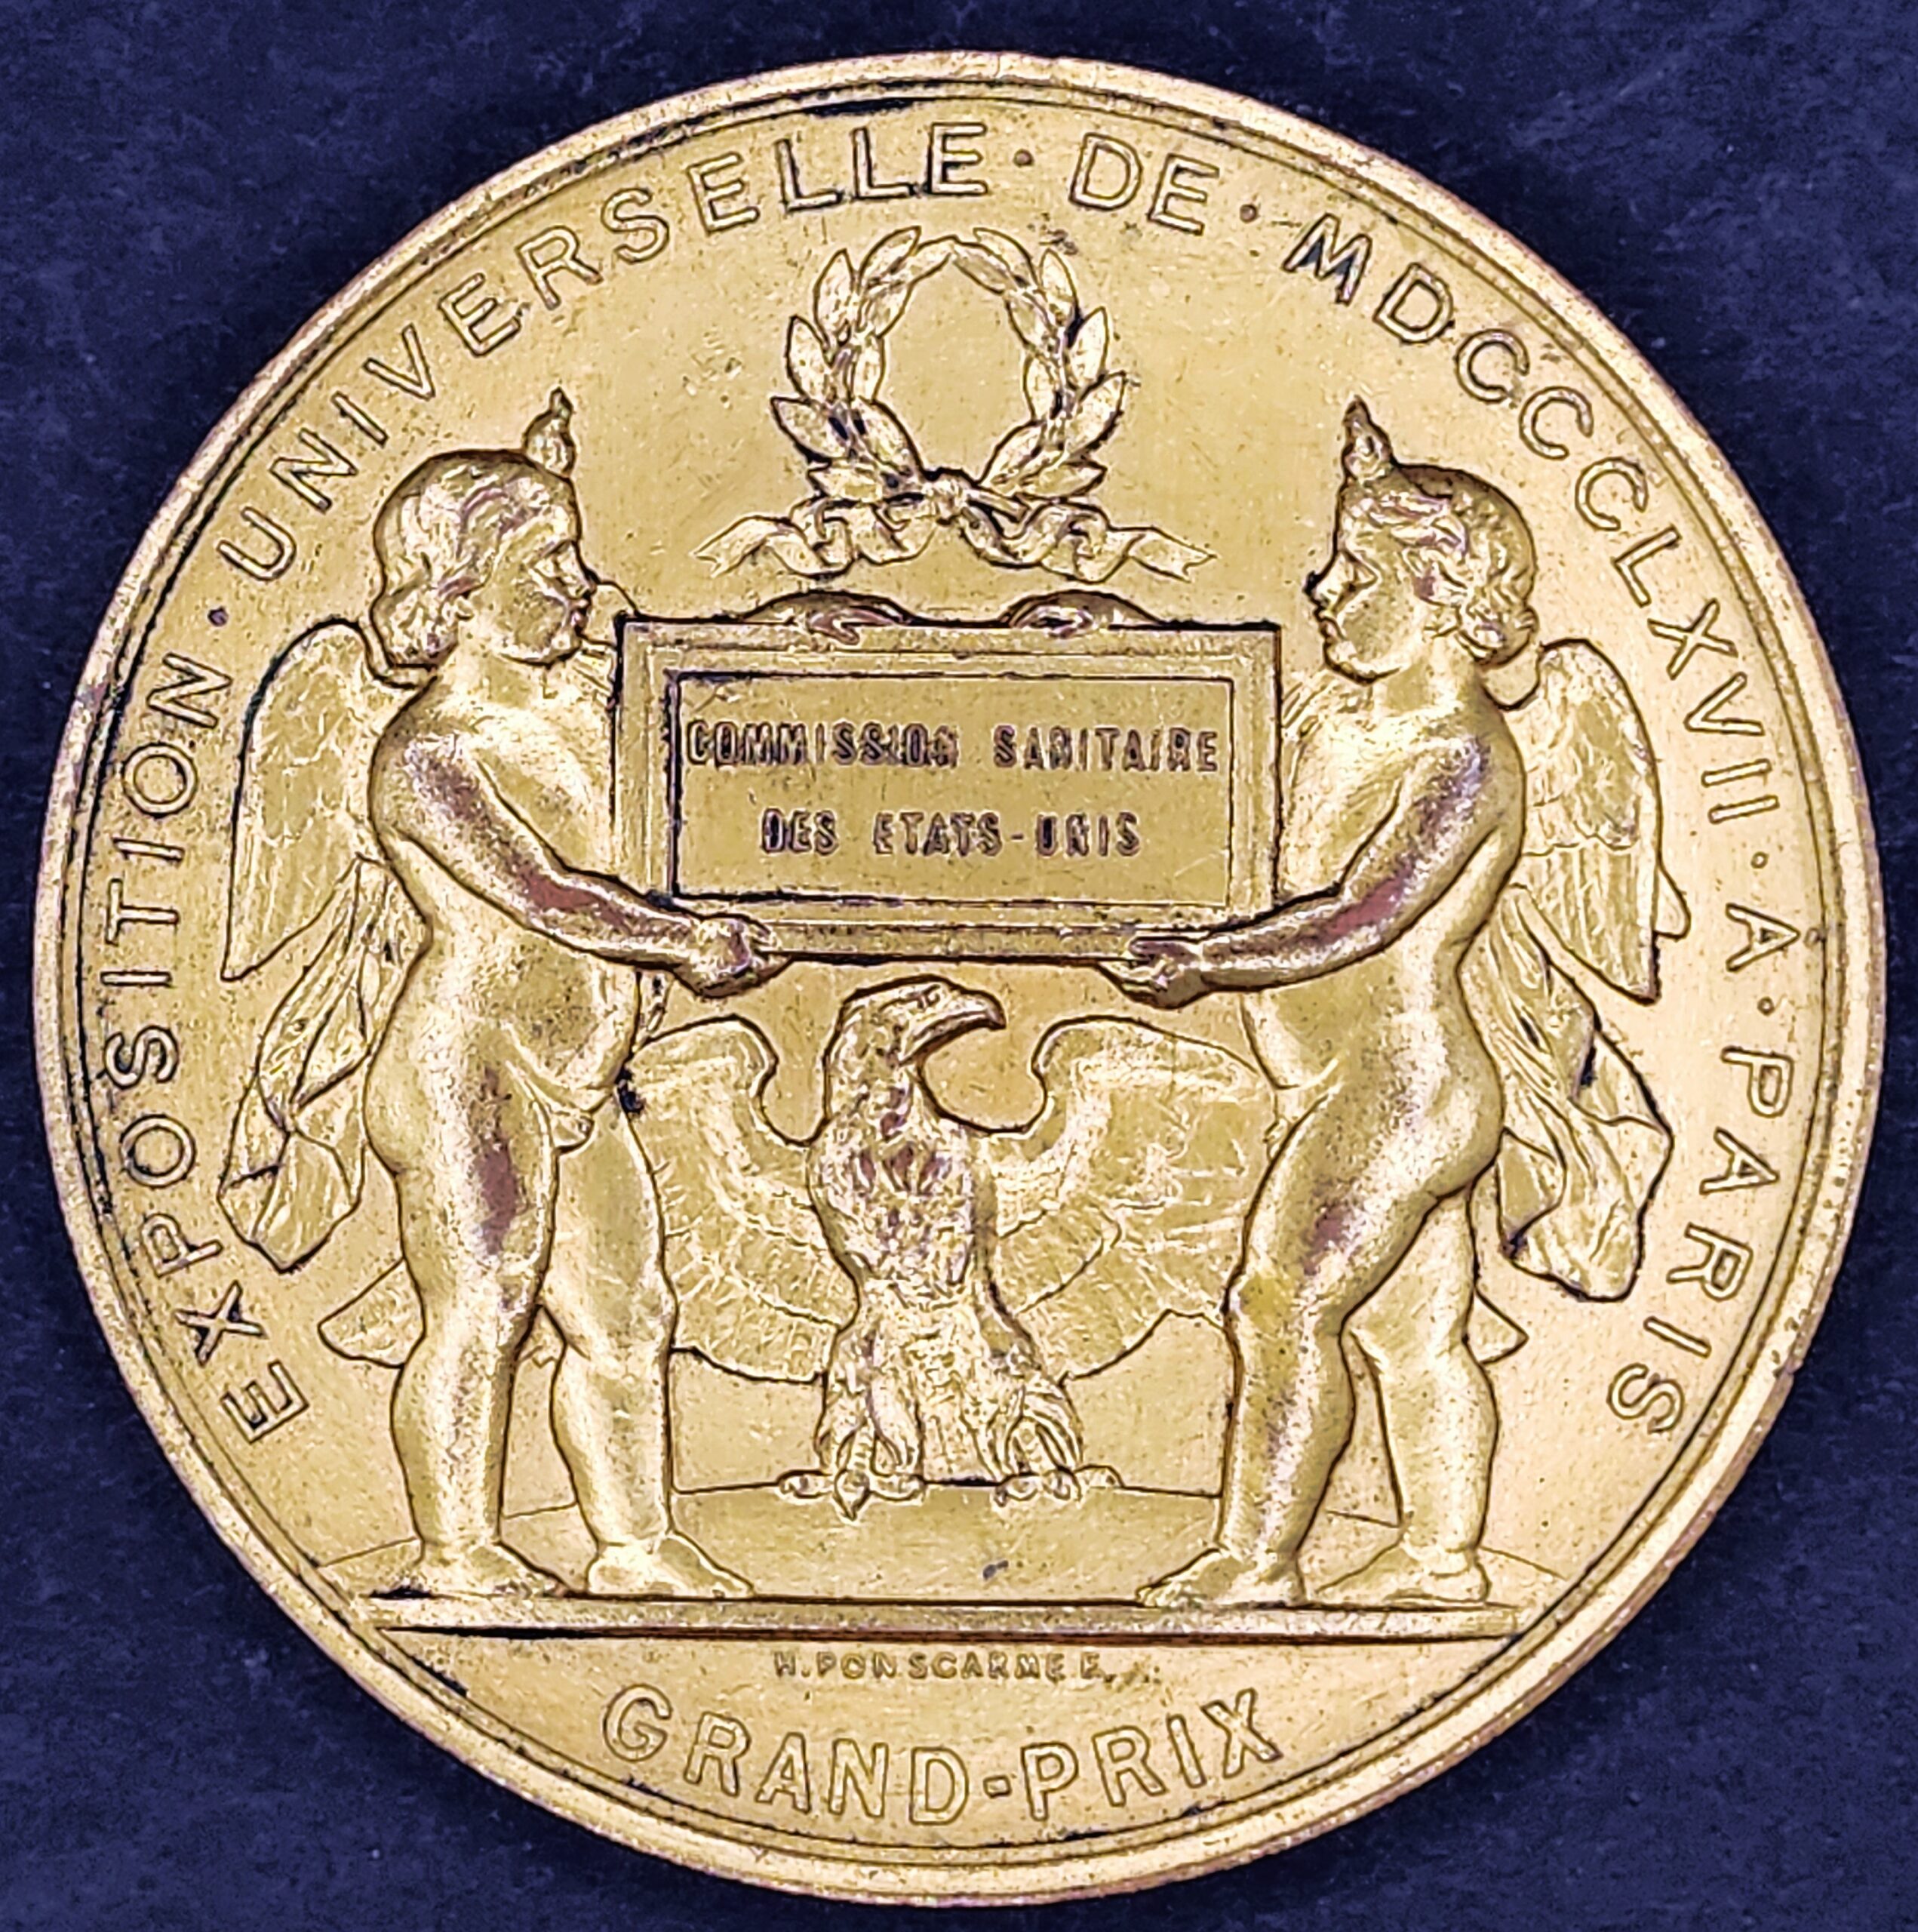 Award Medals of the 1867 Paris Exposition